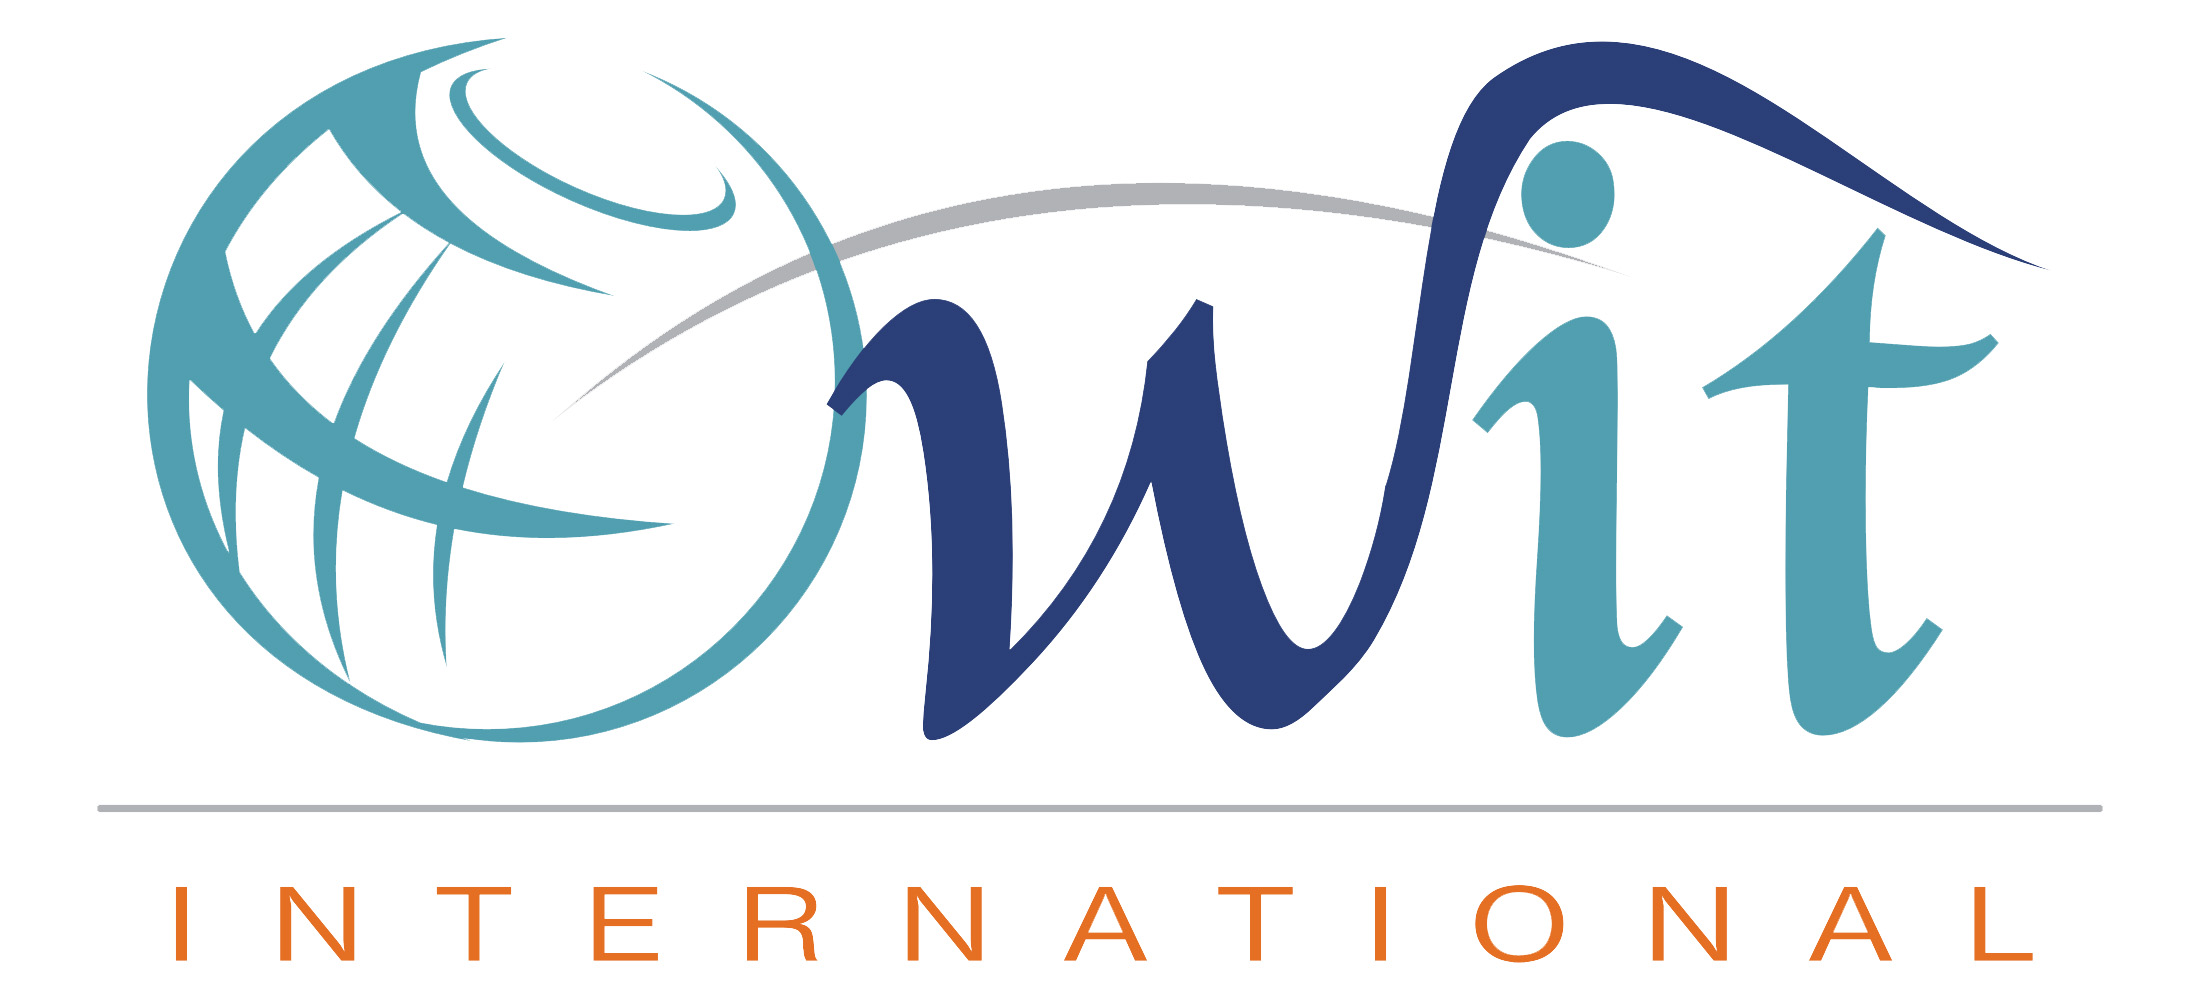 OFFICIAL OWIT LOGO